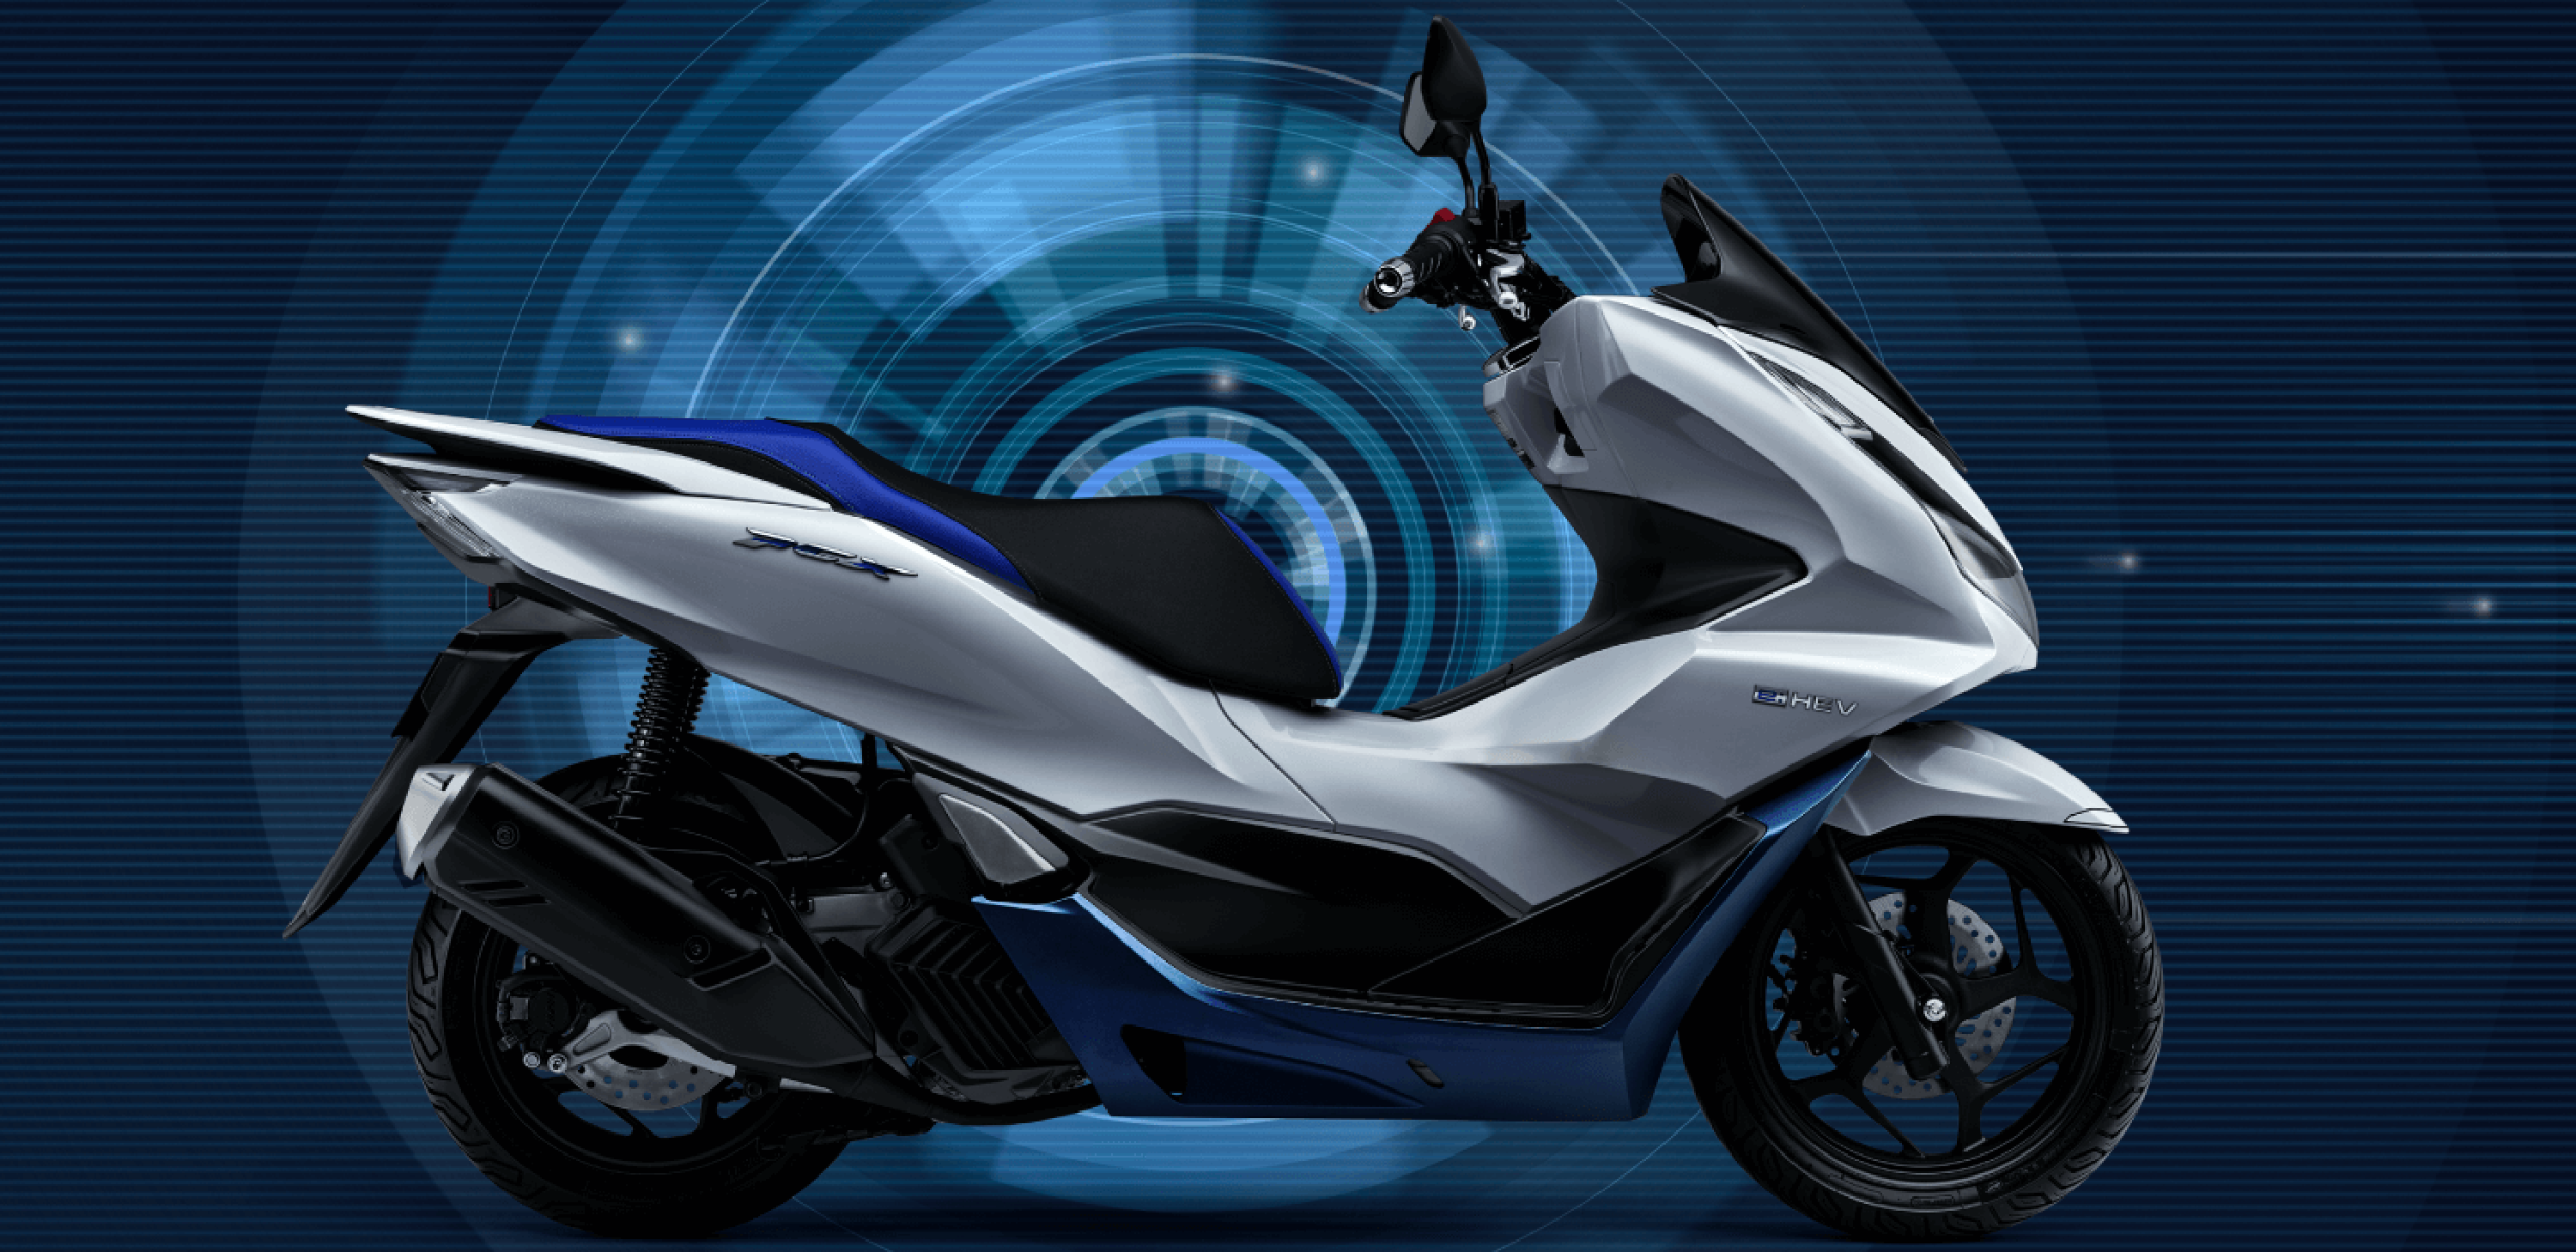 2021 Honda PCX 160 And PCX e:HEV Hybrid Launched In Japan